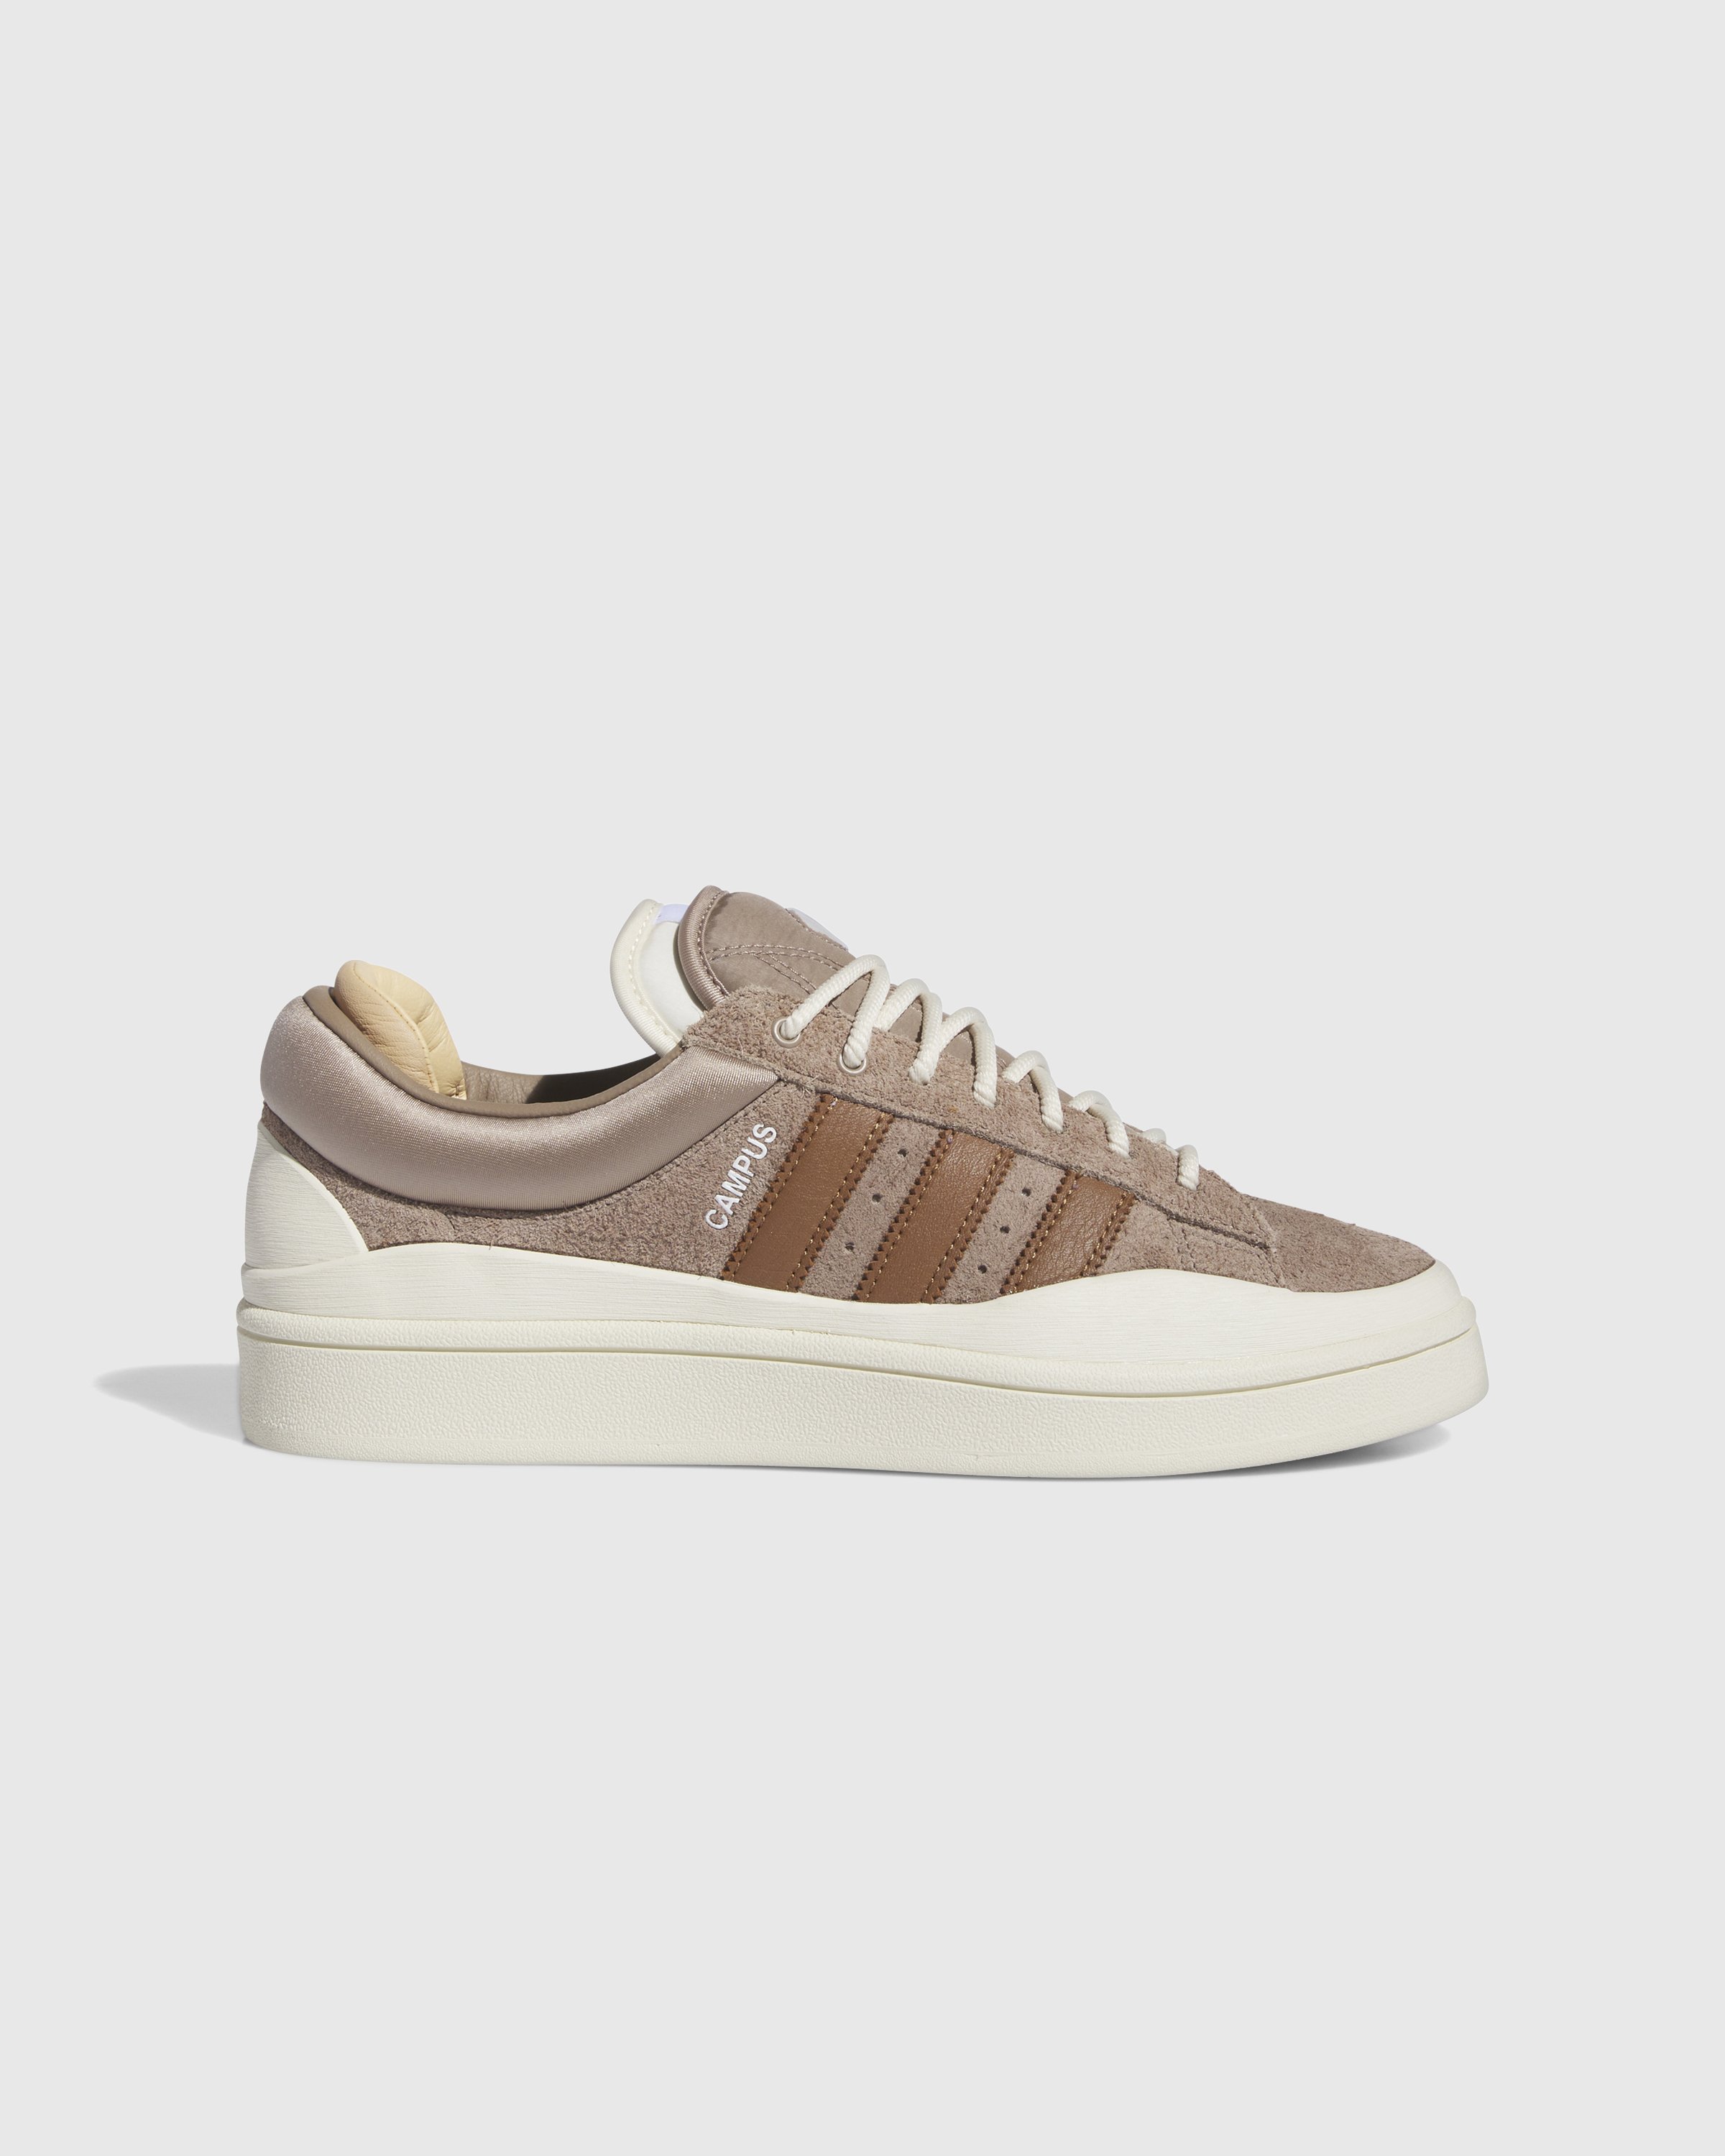 Adidas x Bad Bunny - Campus Chalky Brown - Footwear - White - Image 1